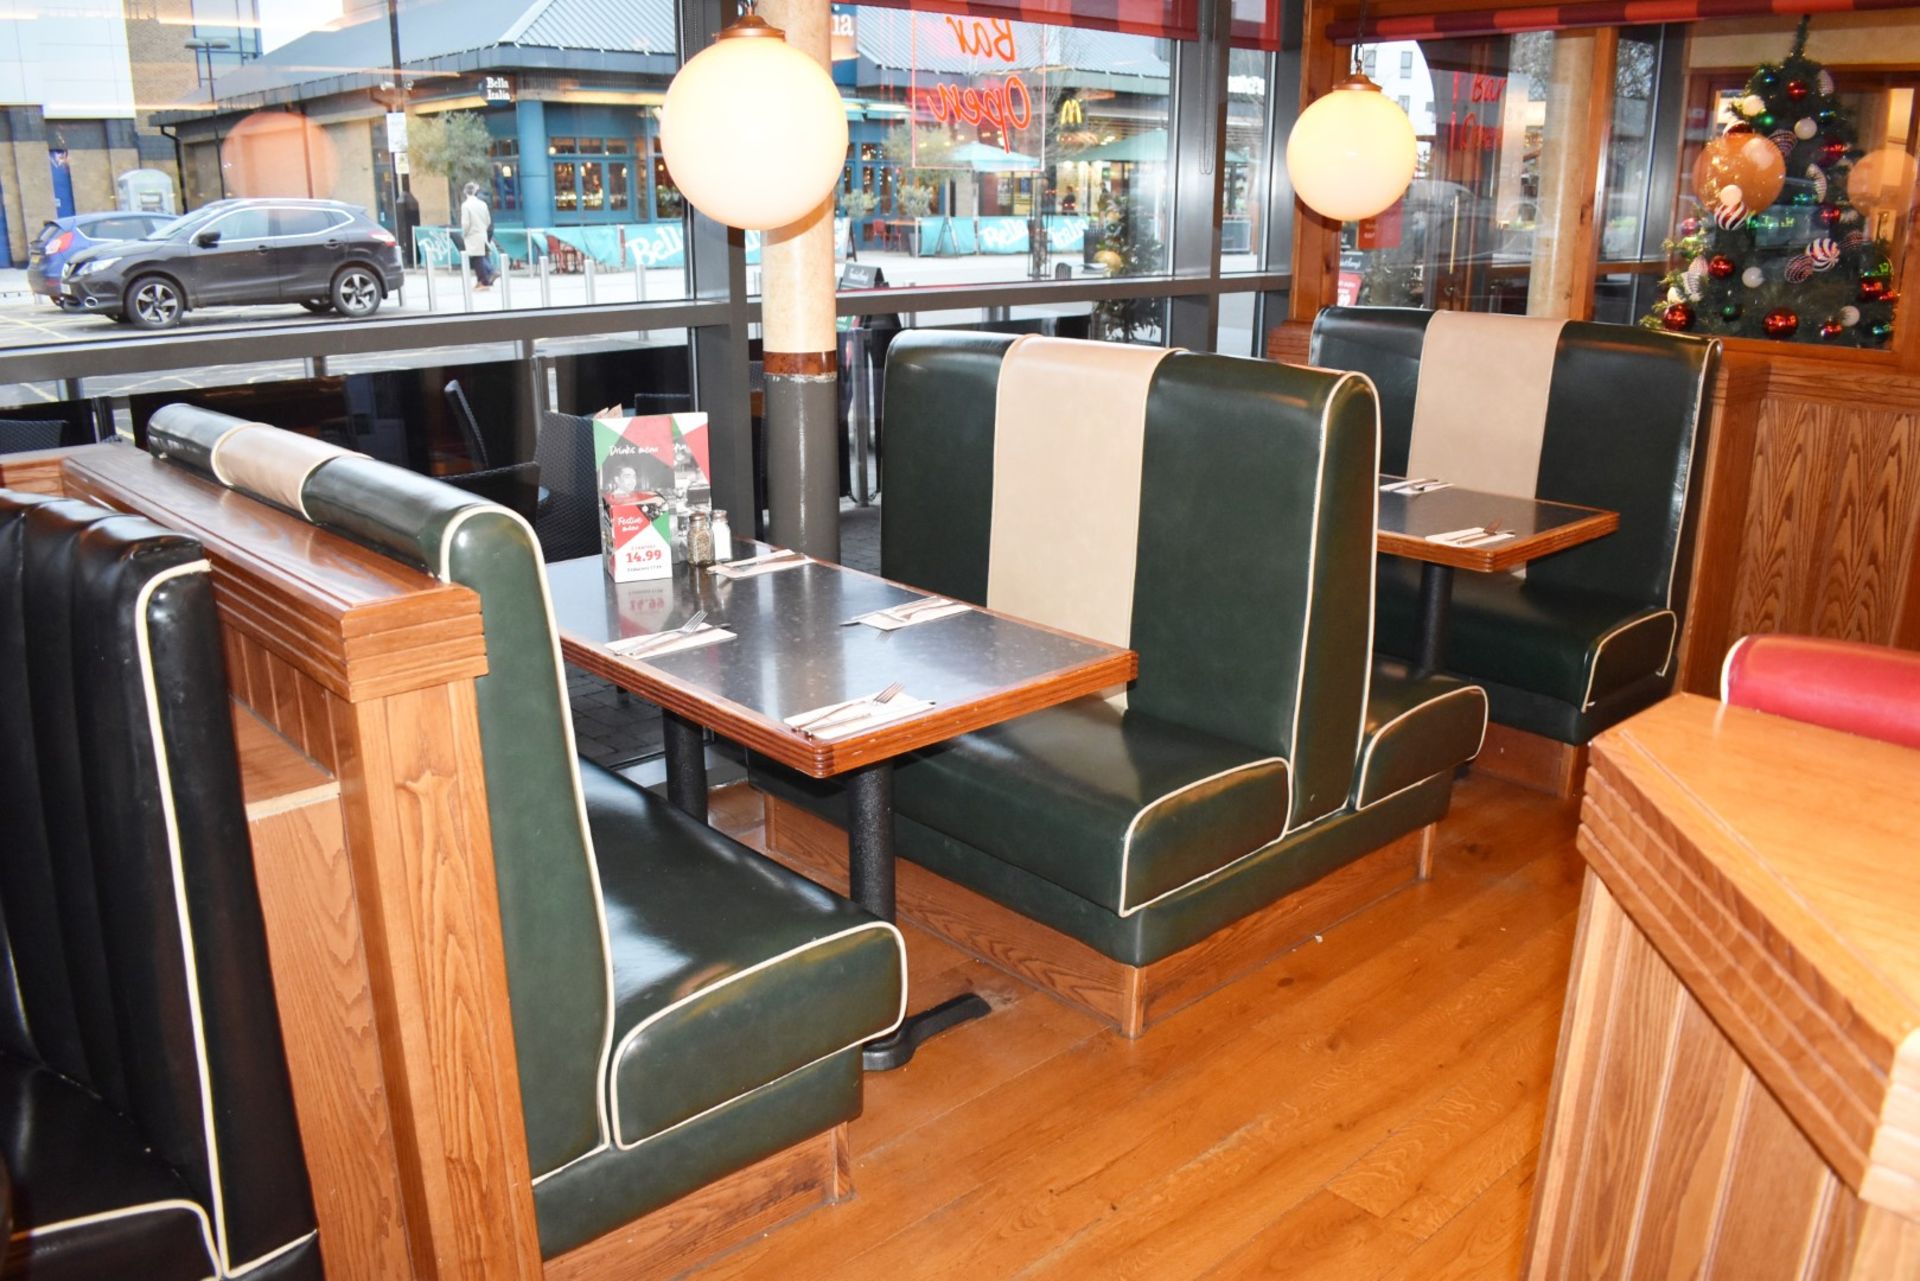 3 x Sections of Booth Seating - Upholstered in a Green and Cream Retro Style Faux Leather Upholstery